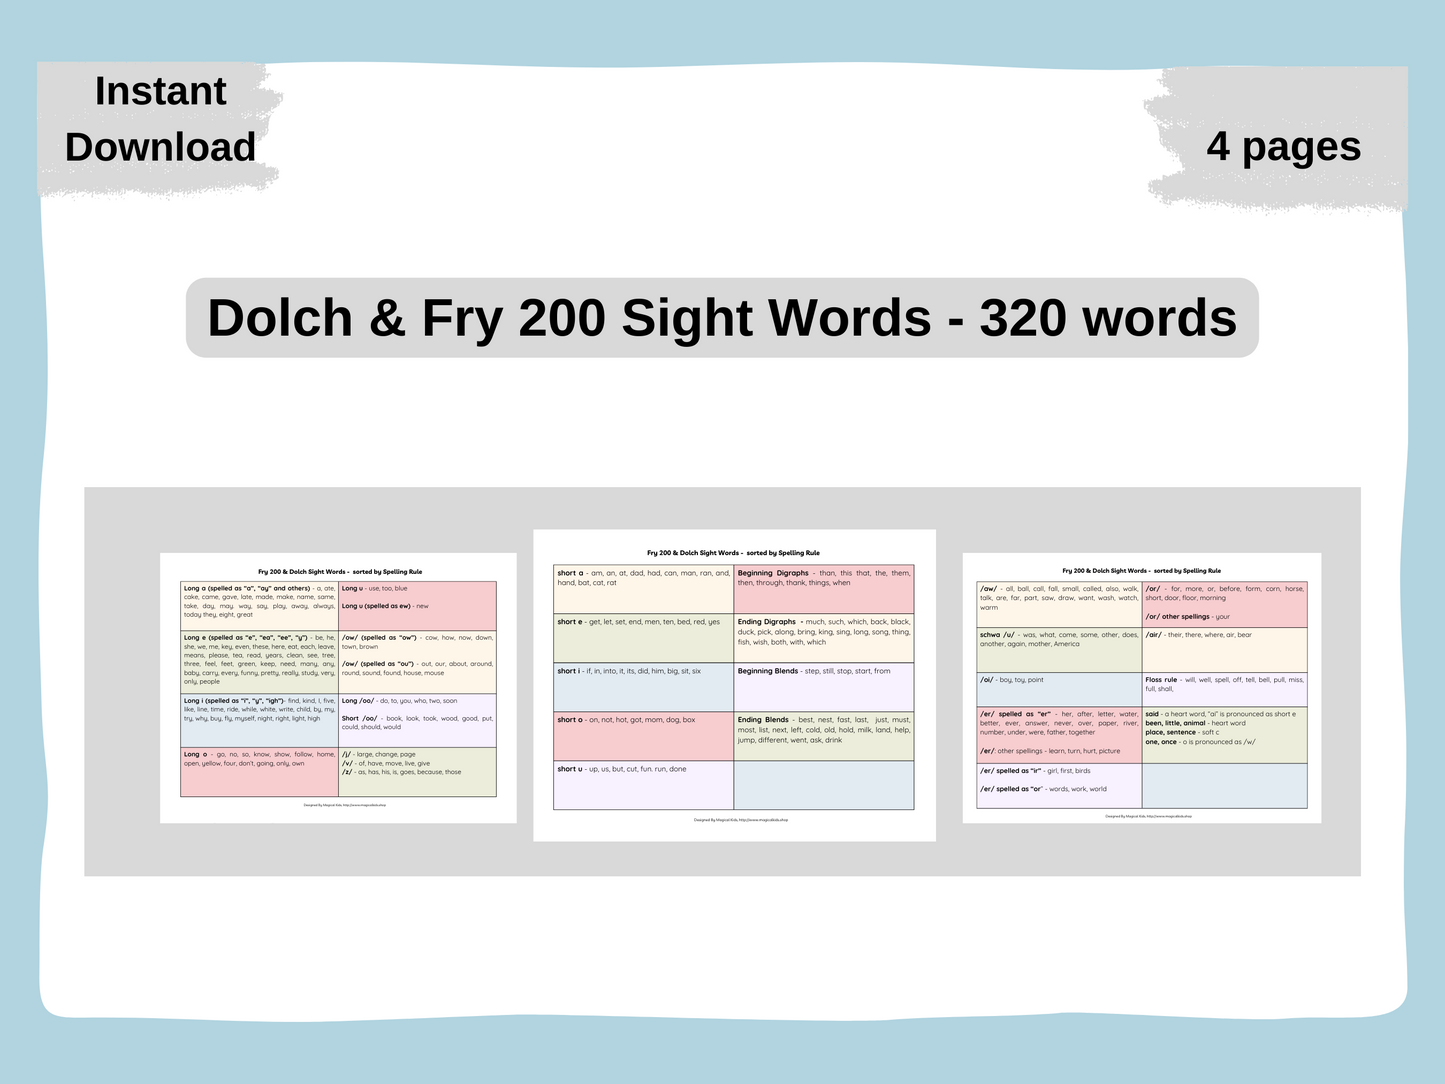 Dolch & Fry Sight Words